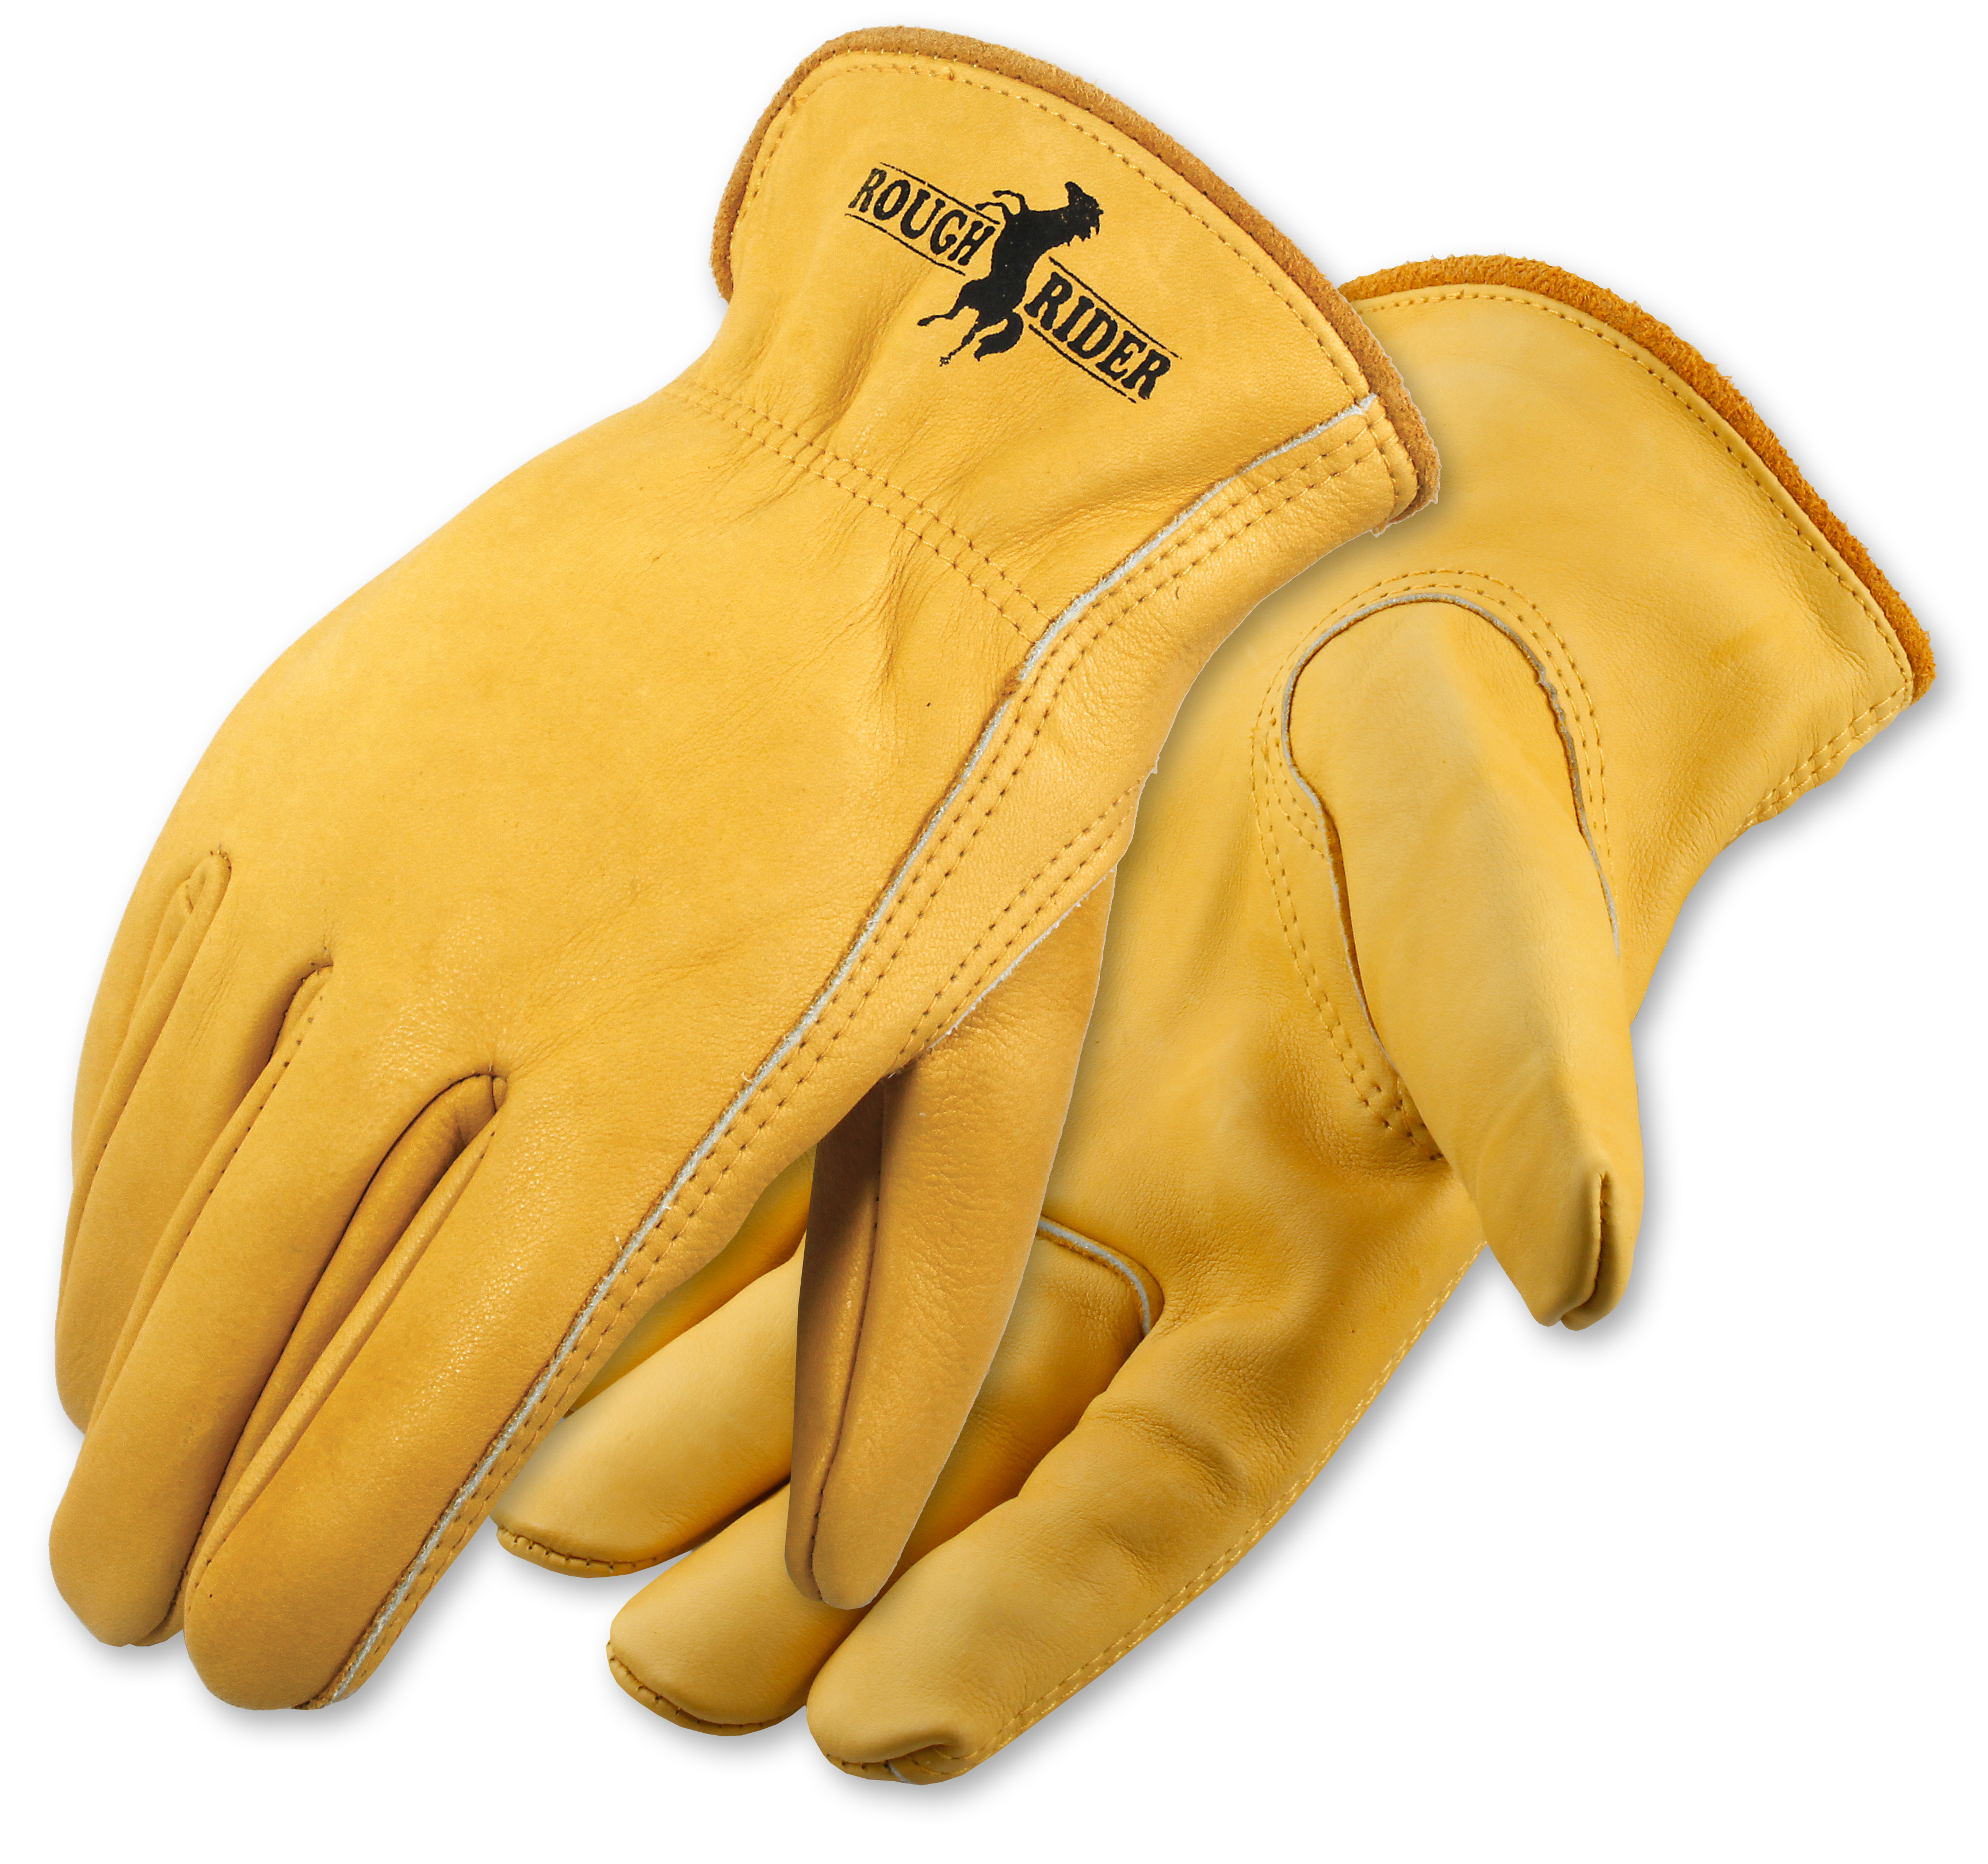 Rough Rider&reg; Drivers Gloves Sewn with Cut Resistant Thread